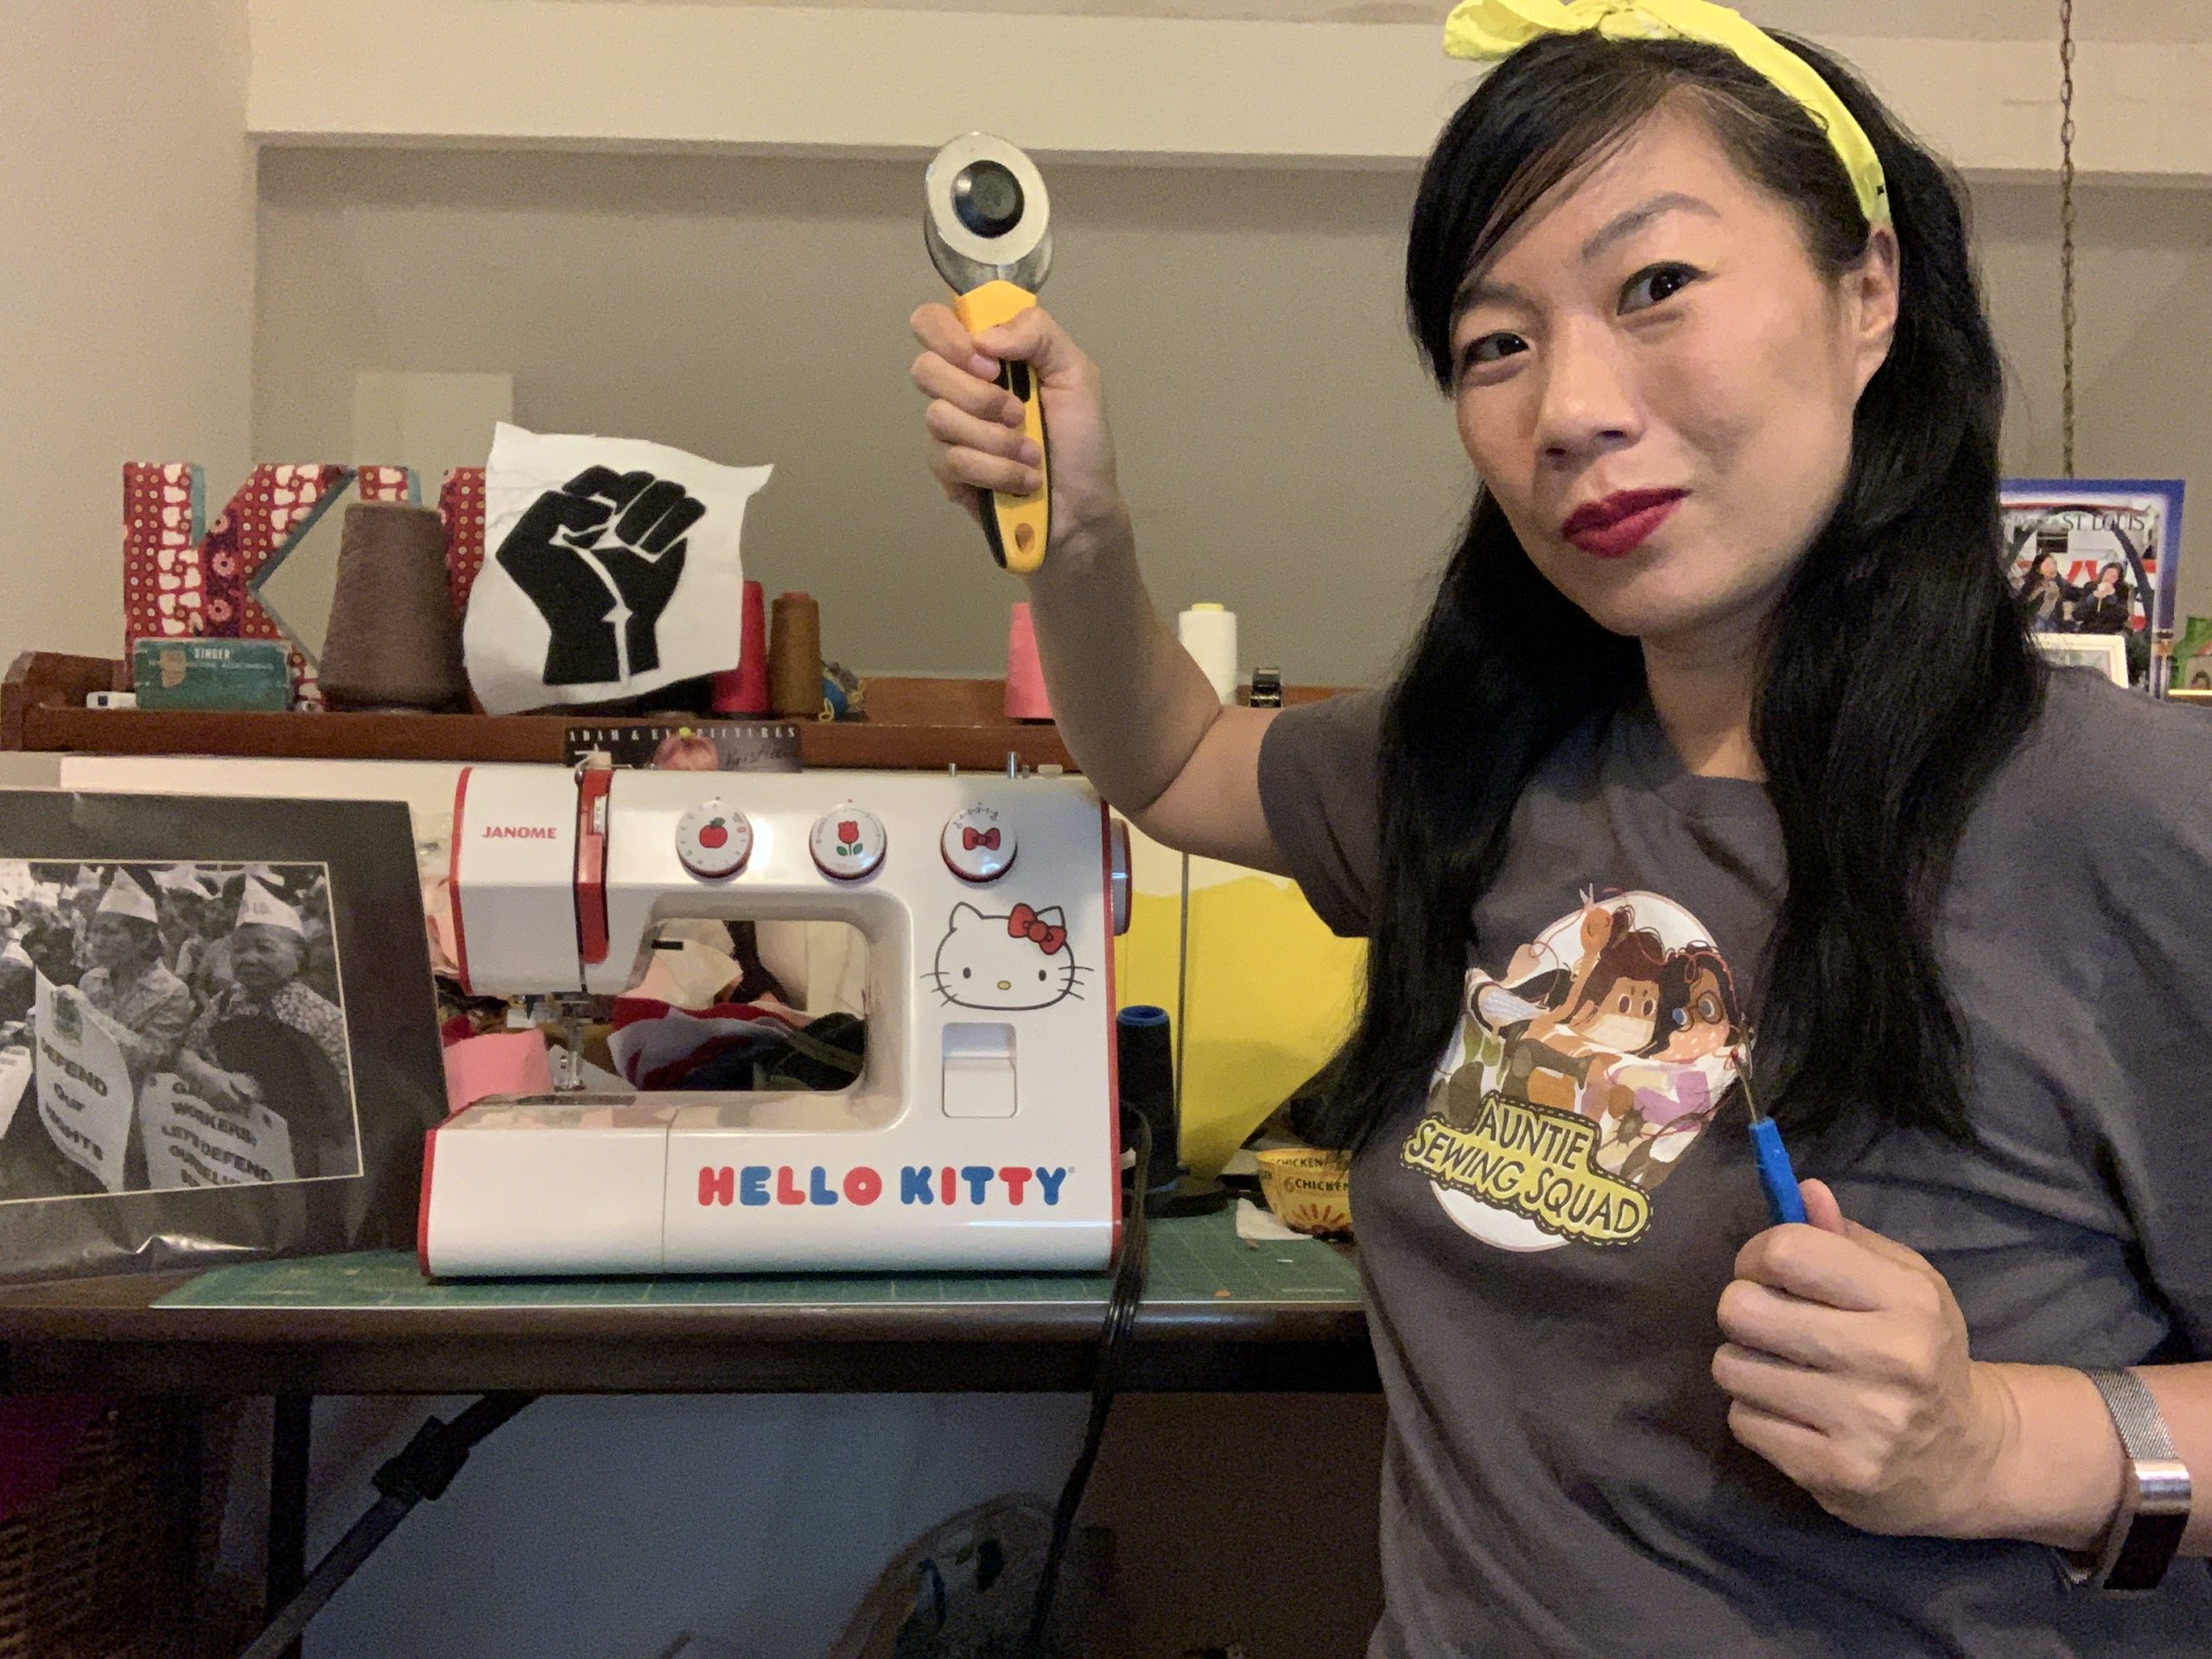 Kristina Wong headshot. In this playful photo, Kristina wields a seam ripper and fabric rotary cutter as she stands next to her Hello Kitty sewing machine in her home studio where her journey with mask making and the Auntie Sewing Squad began in March 2020. Kristina is a middle-aged Chinese American woman with long black hair that is tied back with a yellow bandana. She wears dark red lipstick, a silver watch, and a grey t-shirt featuring the Auntie Sewing Squad logo. Next to her diminutive kiddie sewing machine, is a black and white photograph of elderly Asian American labor protestors by the late Corky Lee. An icon of a Black Power fist is prominently displayed amidst her industrial spools of thread and large red and white patterned stuffed “K” and “W” initials.